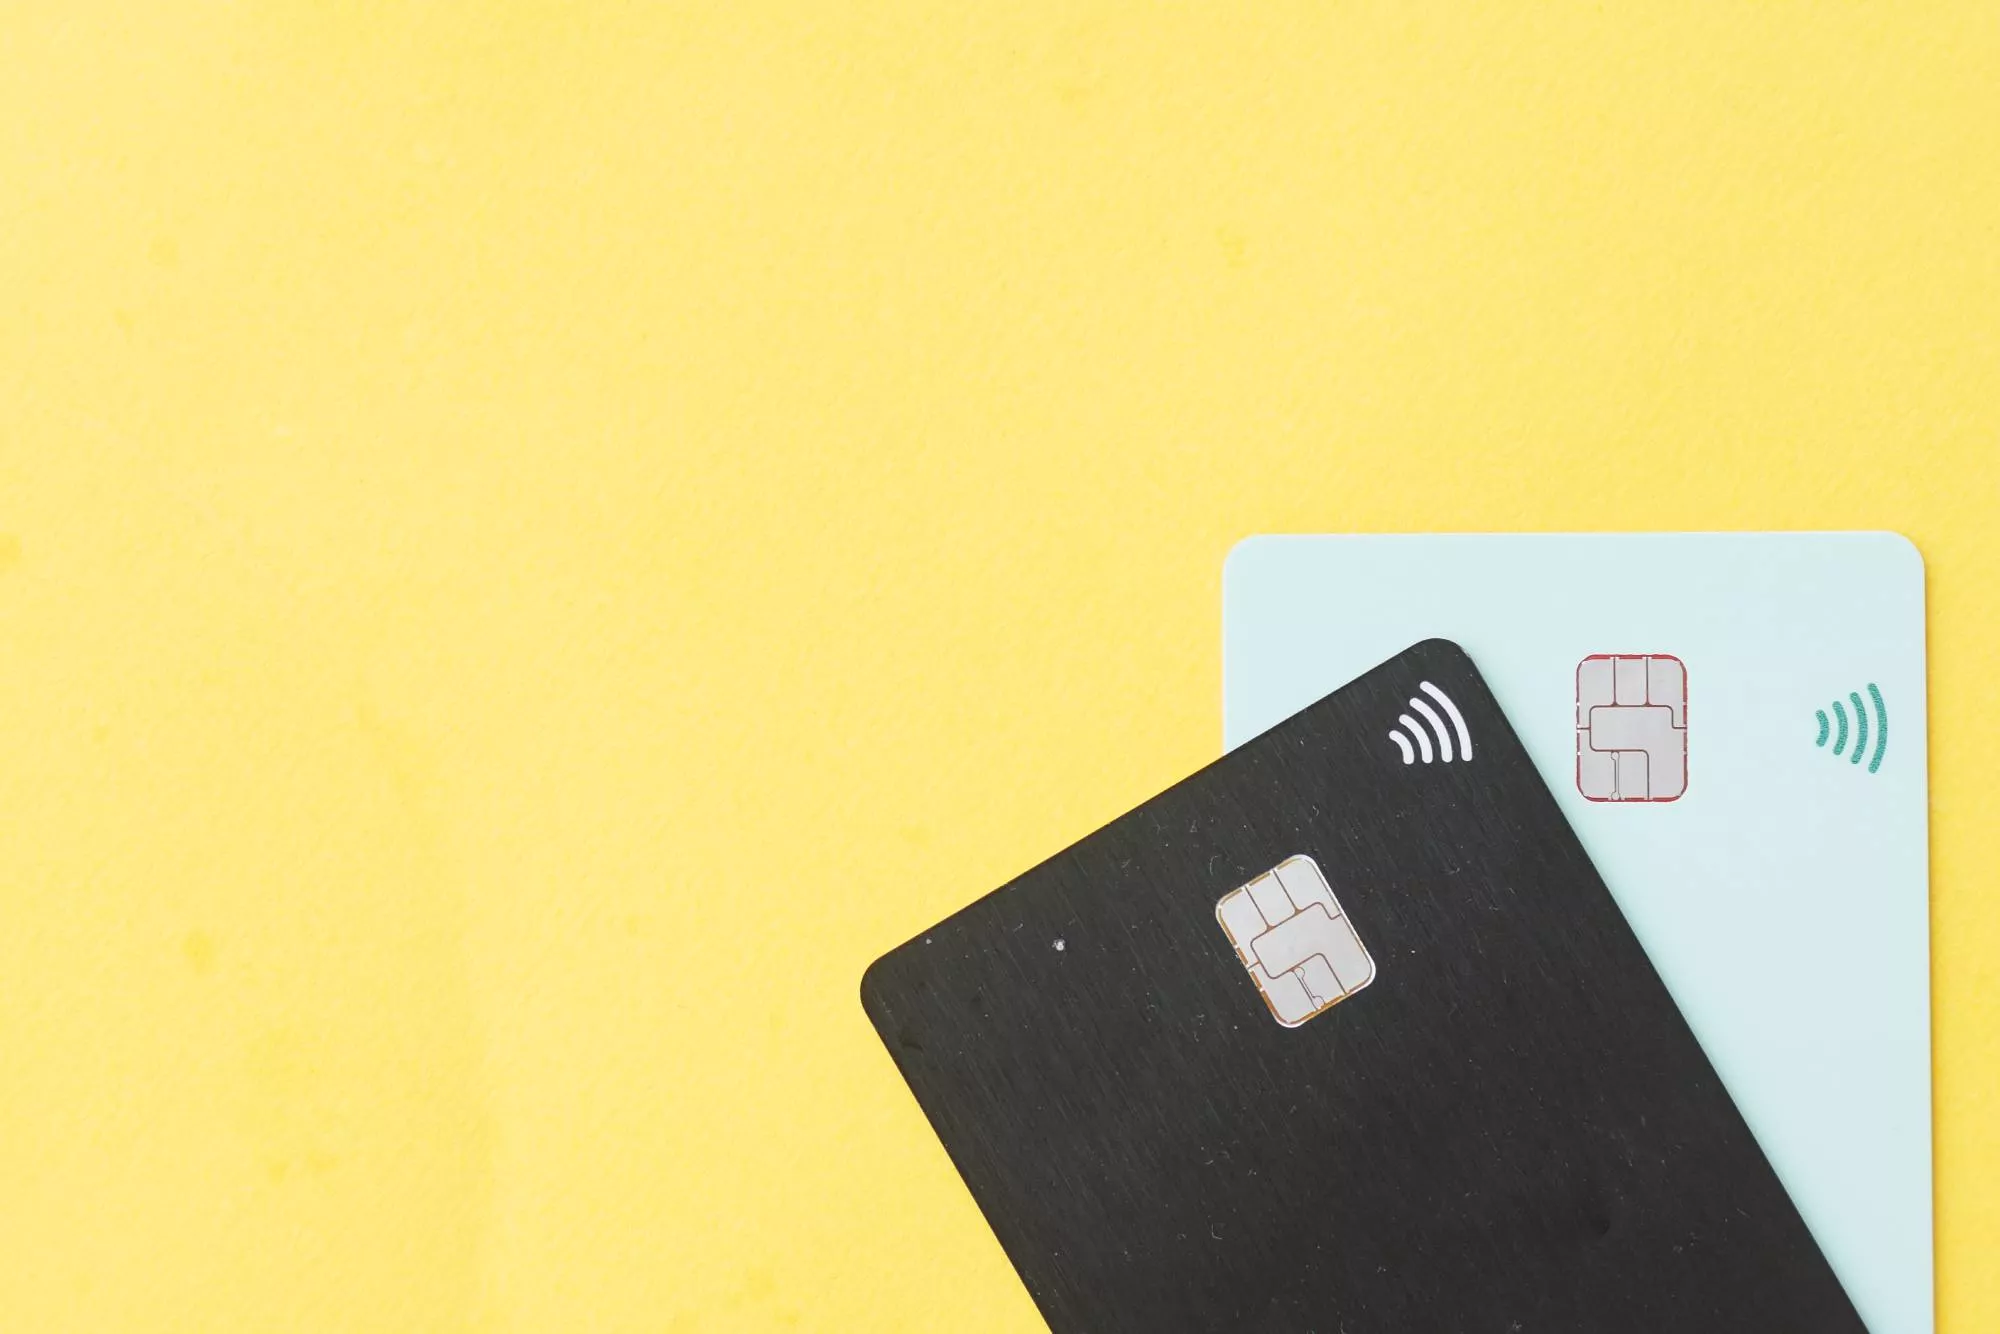 Credit cards on a yellow background ready to process after getting a merchant account.